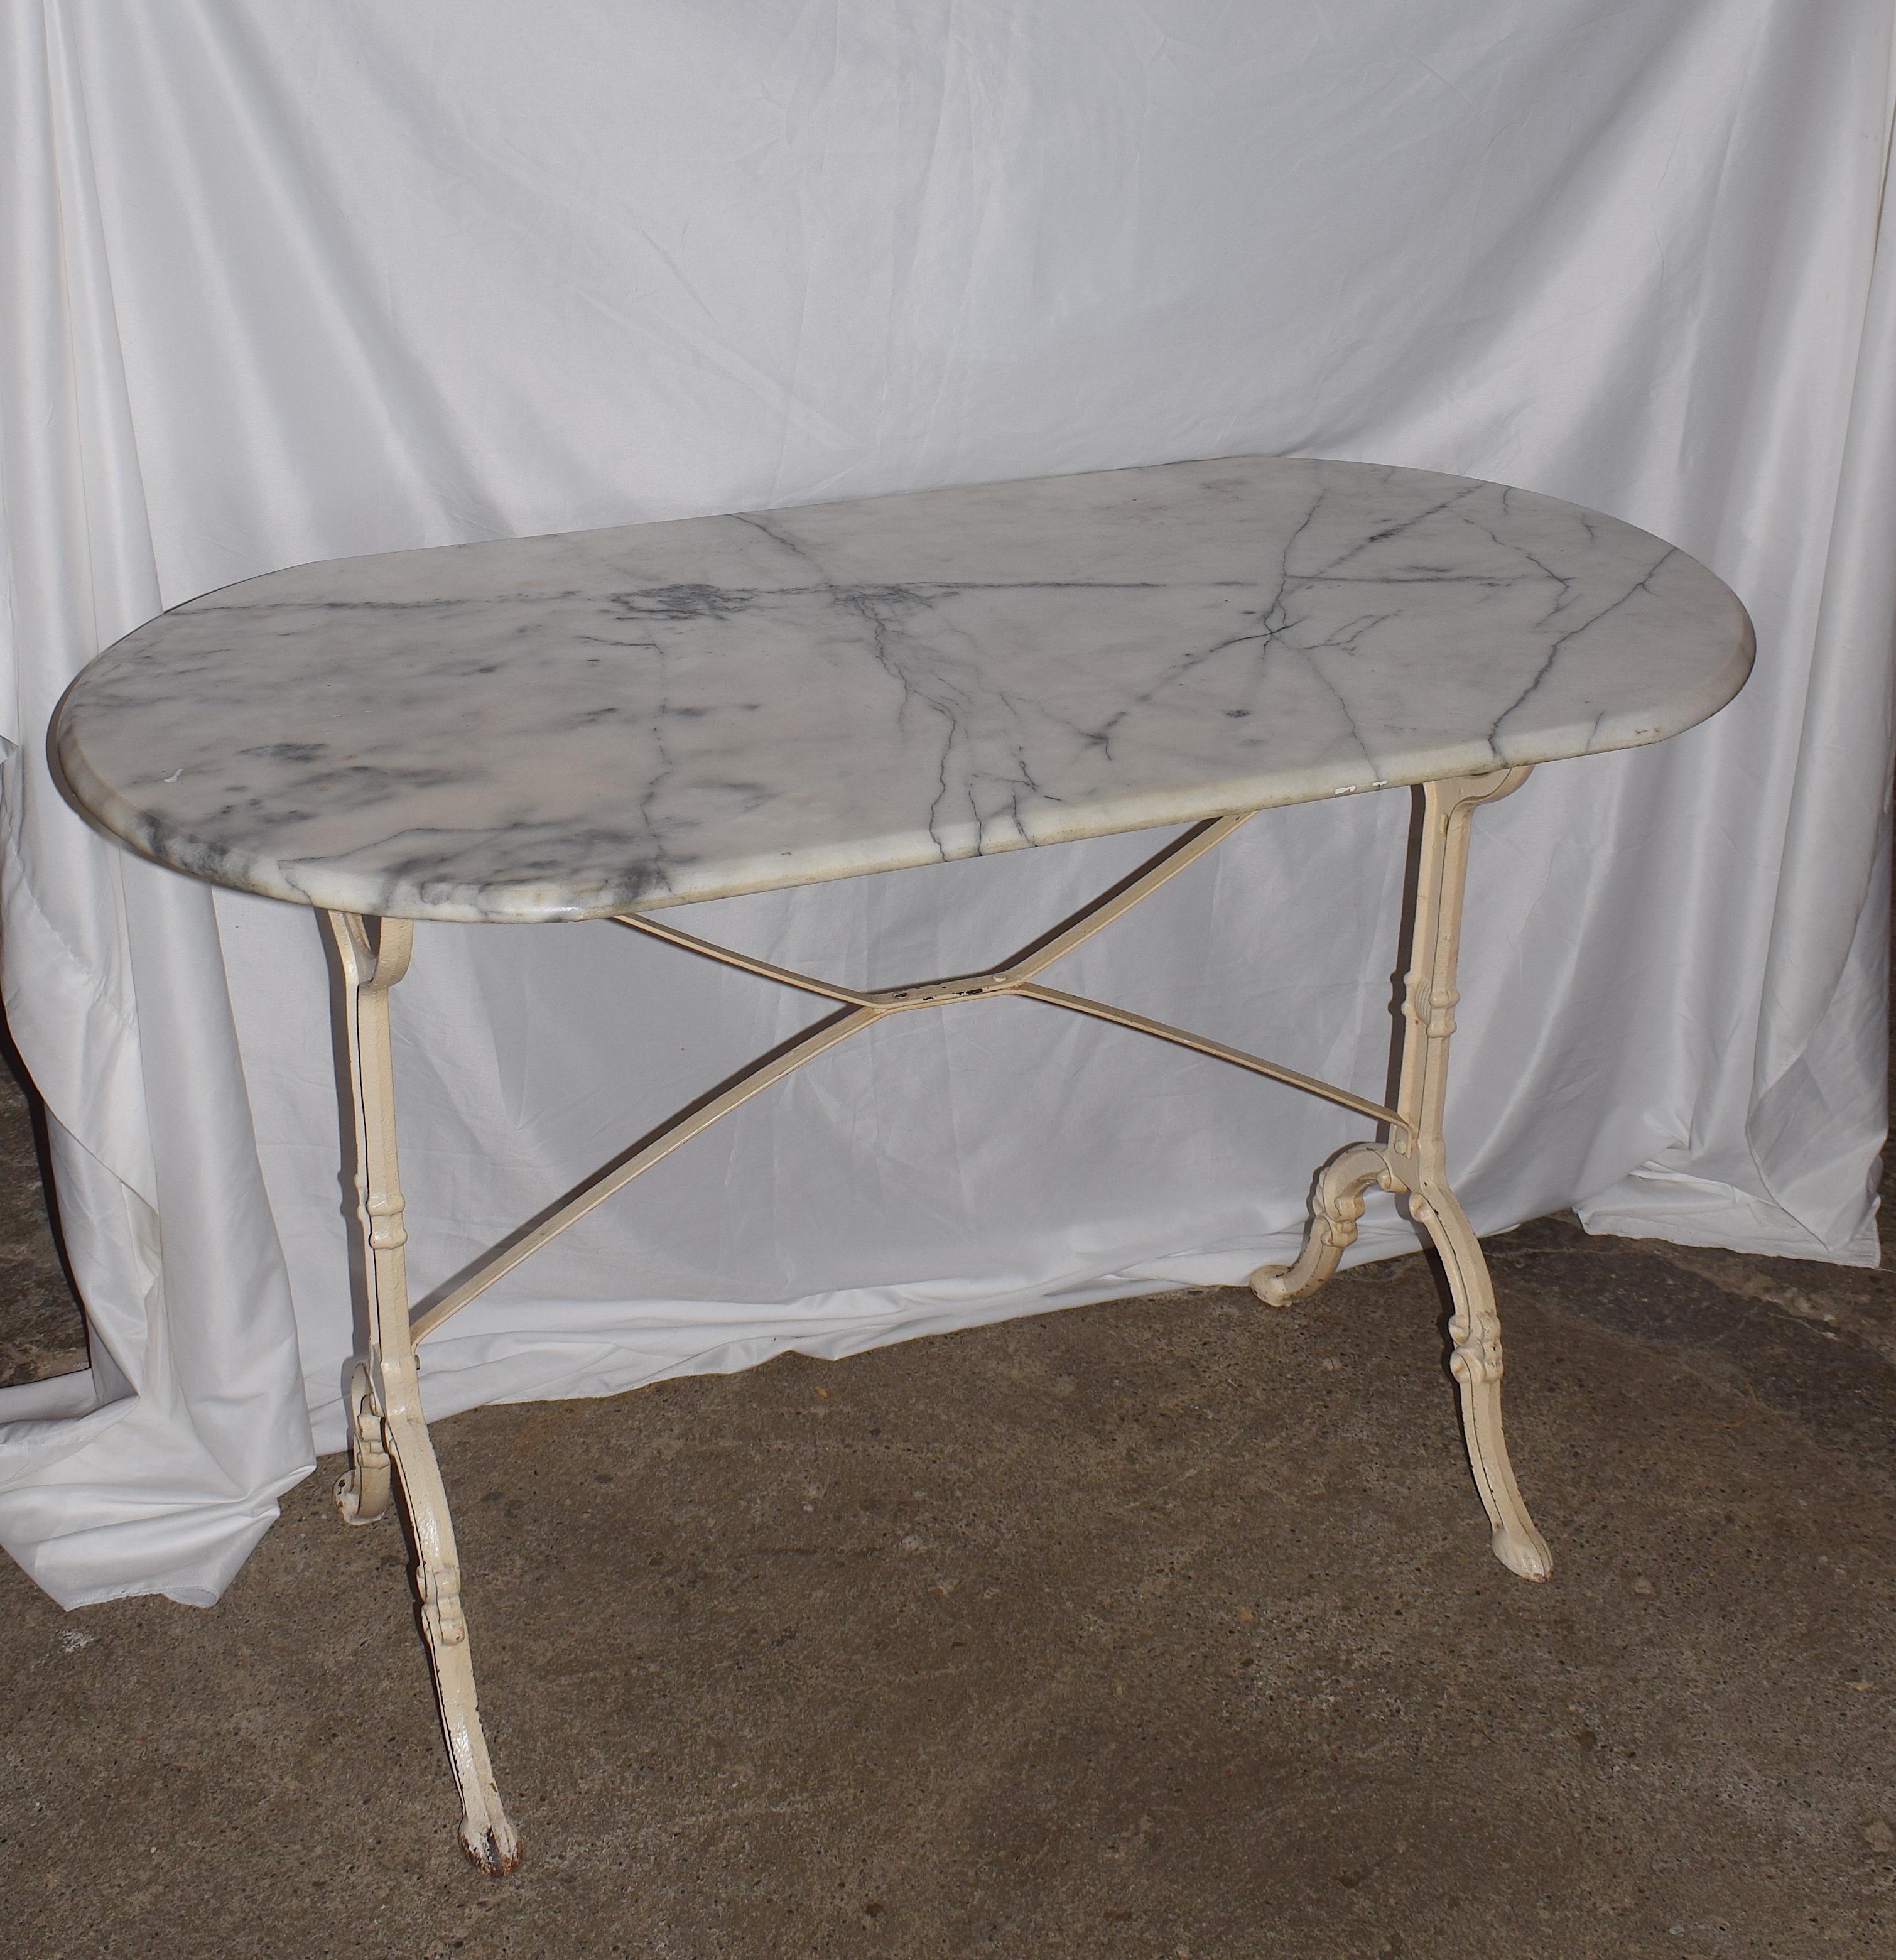 This French bistro table has an oval marble top it dates from the early 20th century. Its marble top rests on a heavy iron based that is painted in a soft cream colour which has gone mustard. In places due to rust, this patina effect adds another